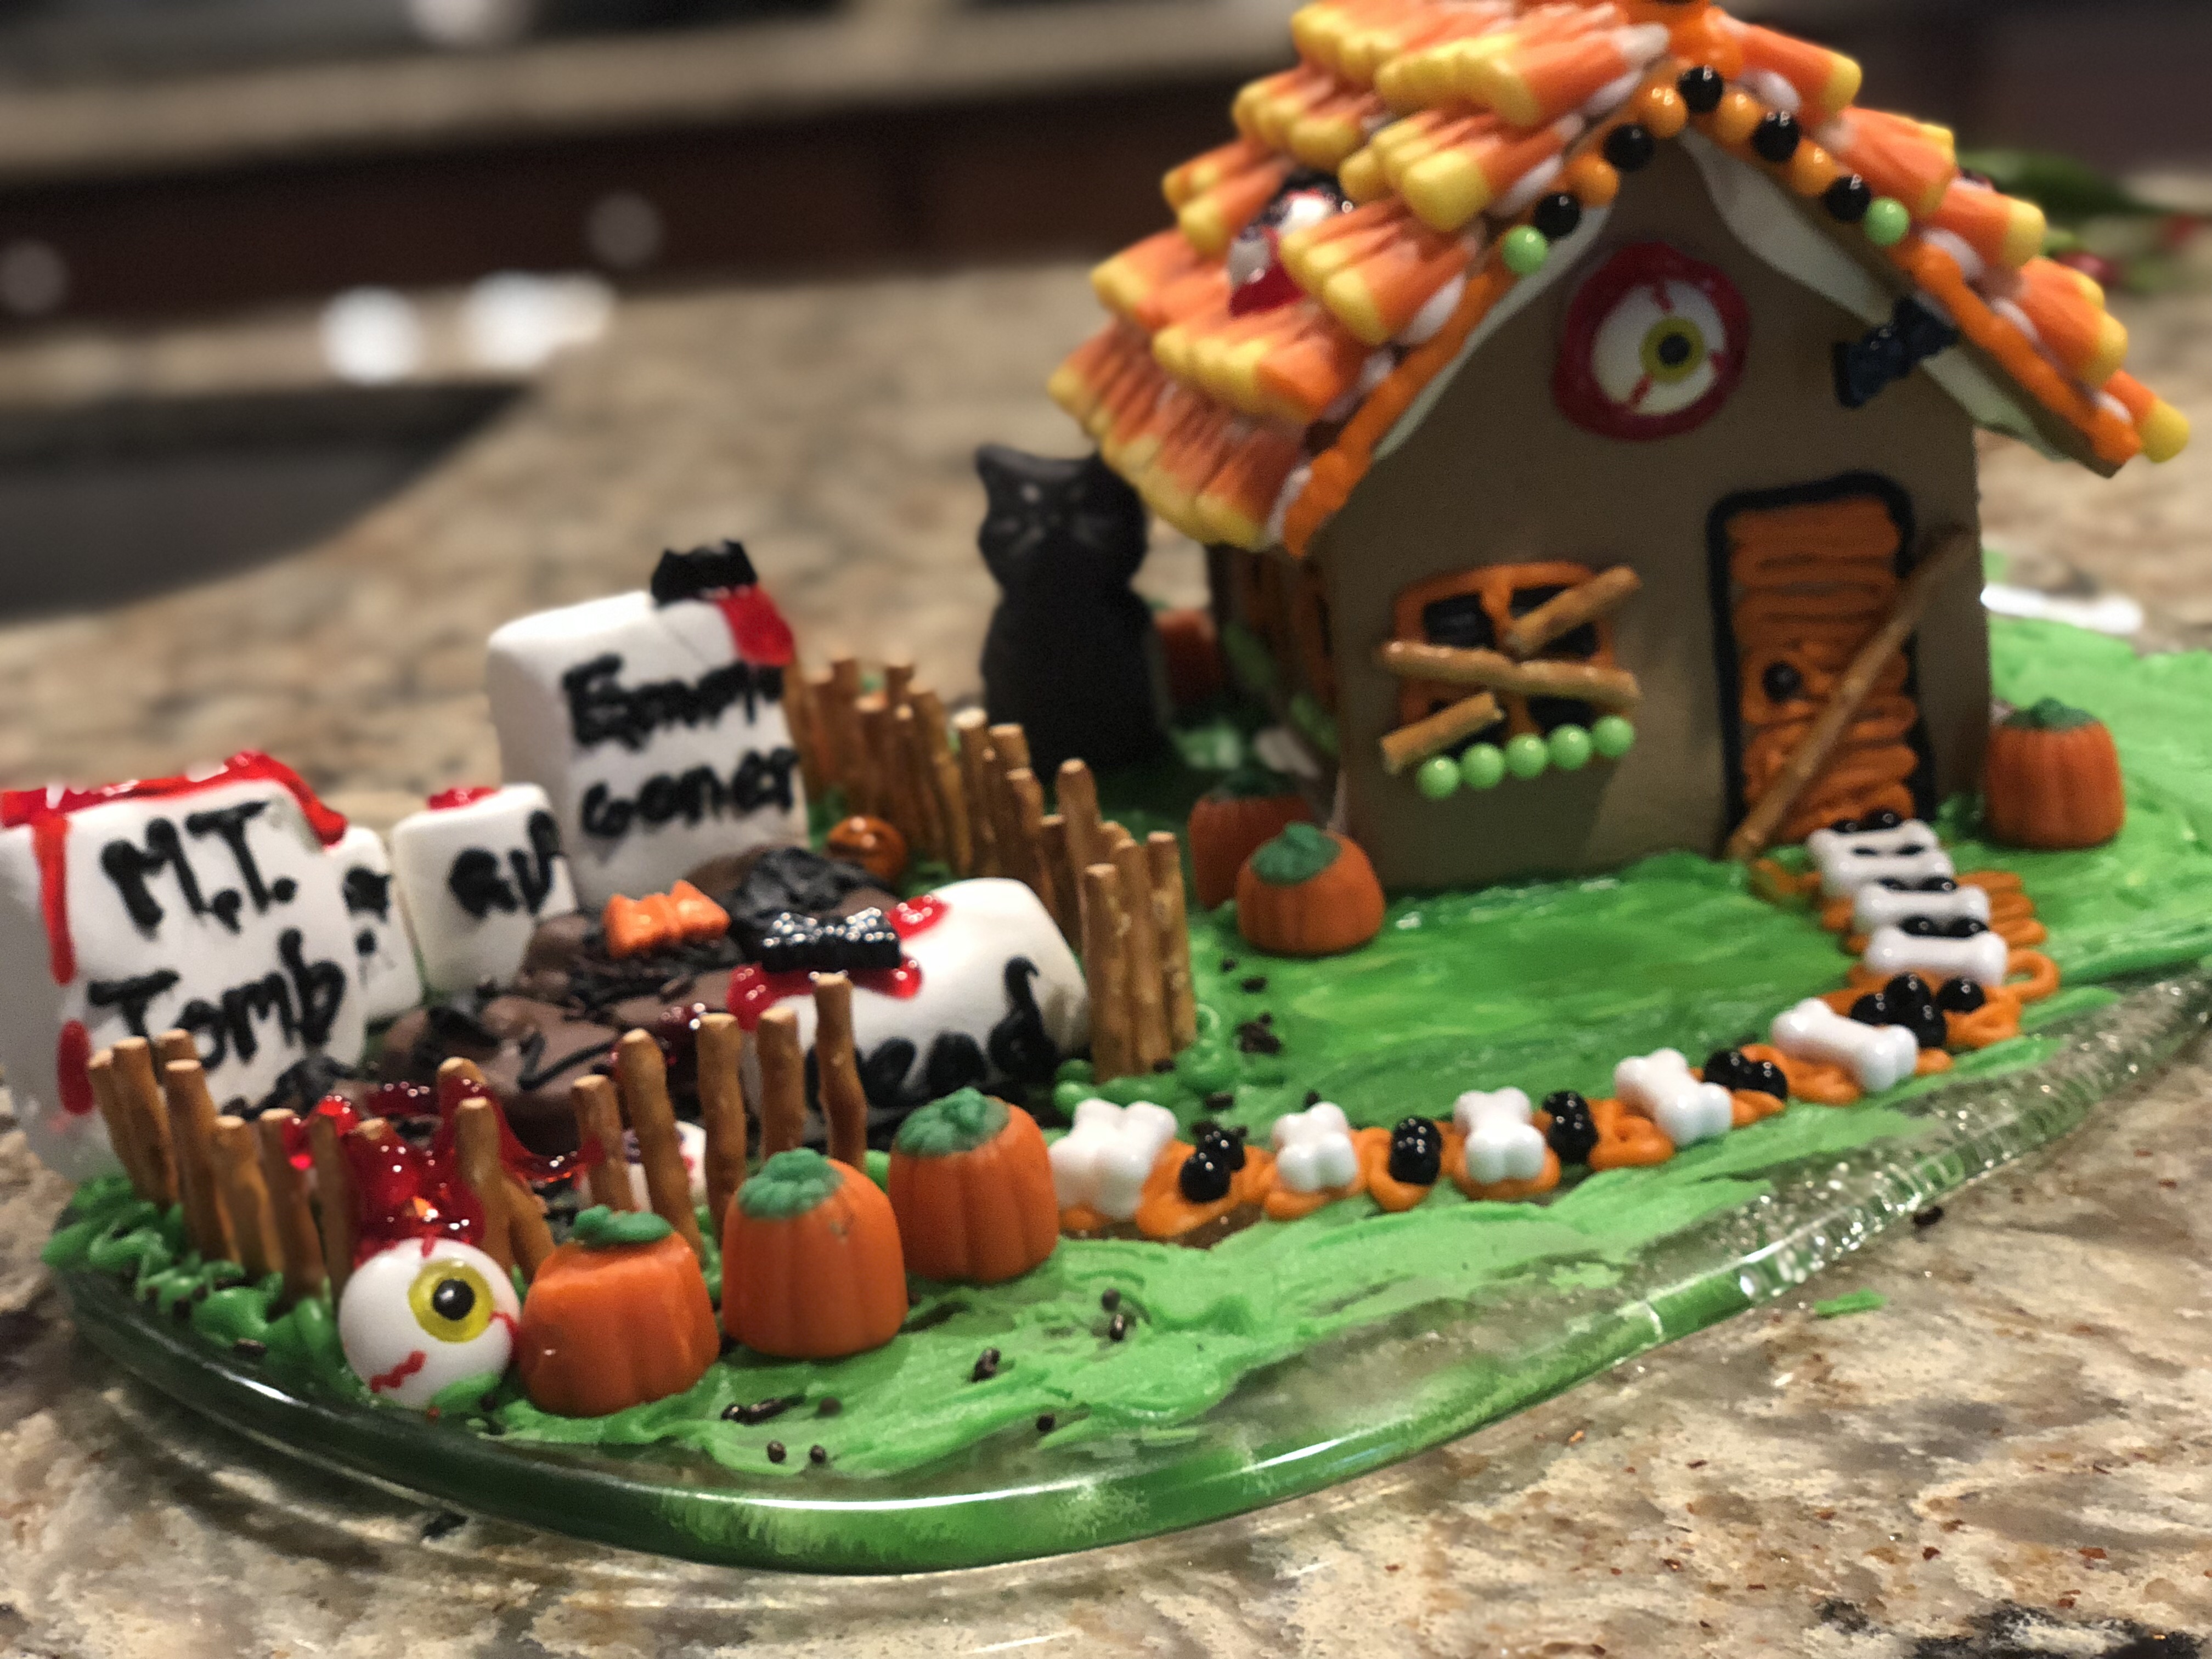 A well decorated haunted gingerbread house for a Halloween candy dish and decoration